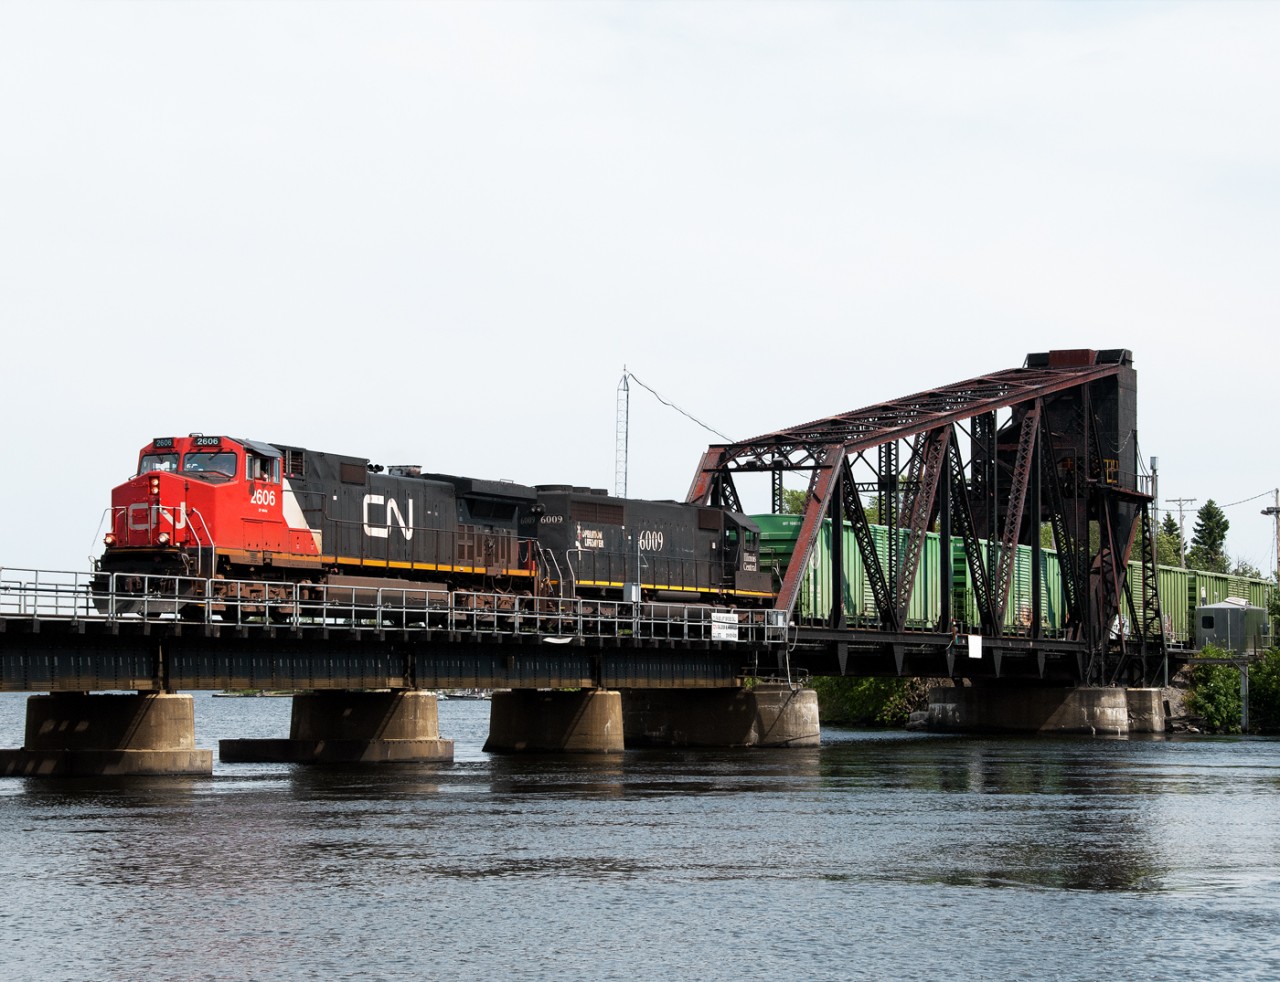 CN train 347 has just departed Ranier Minnesota and crosses the International Bridge over the Rainy River on the east side of Fort Frances. This is the second busiest international rail crossing after Sarnia - Port Huron.